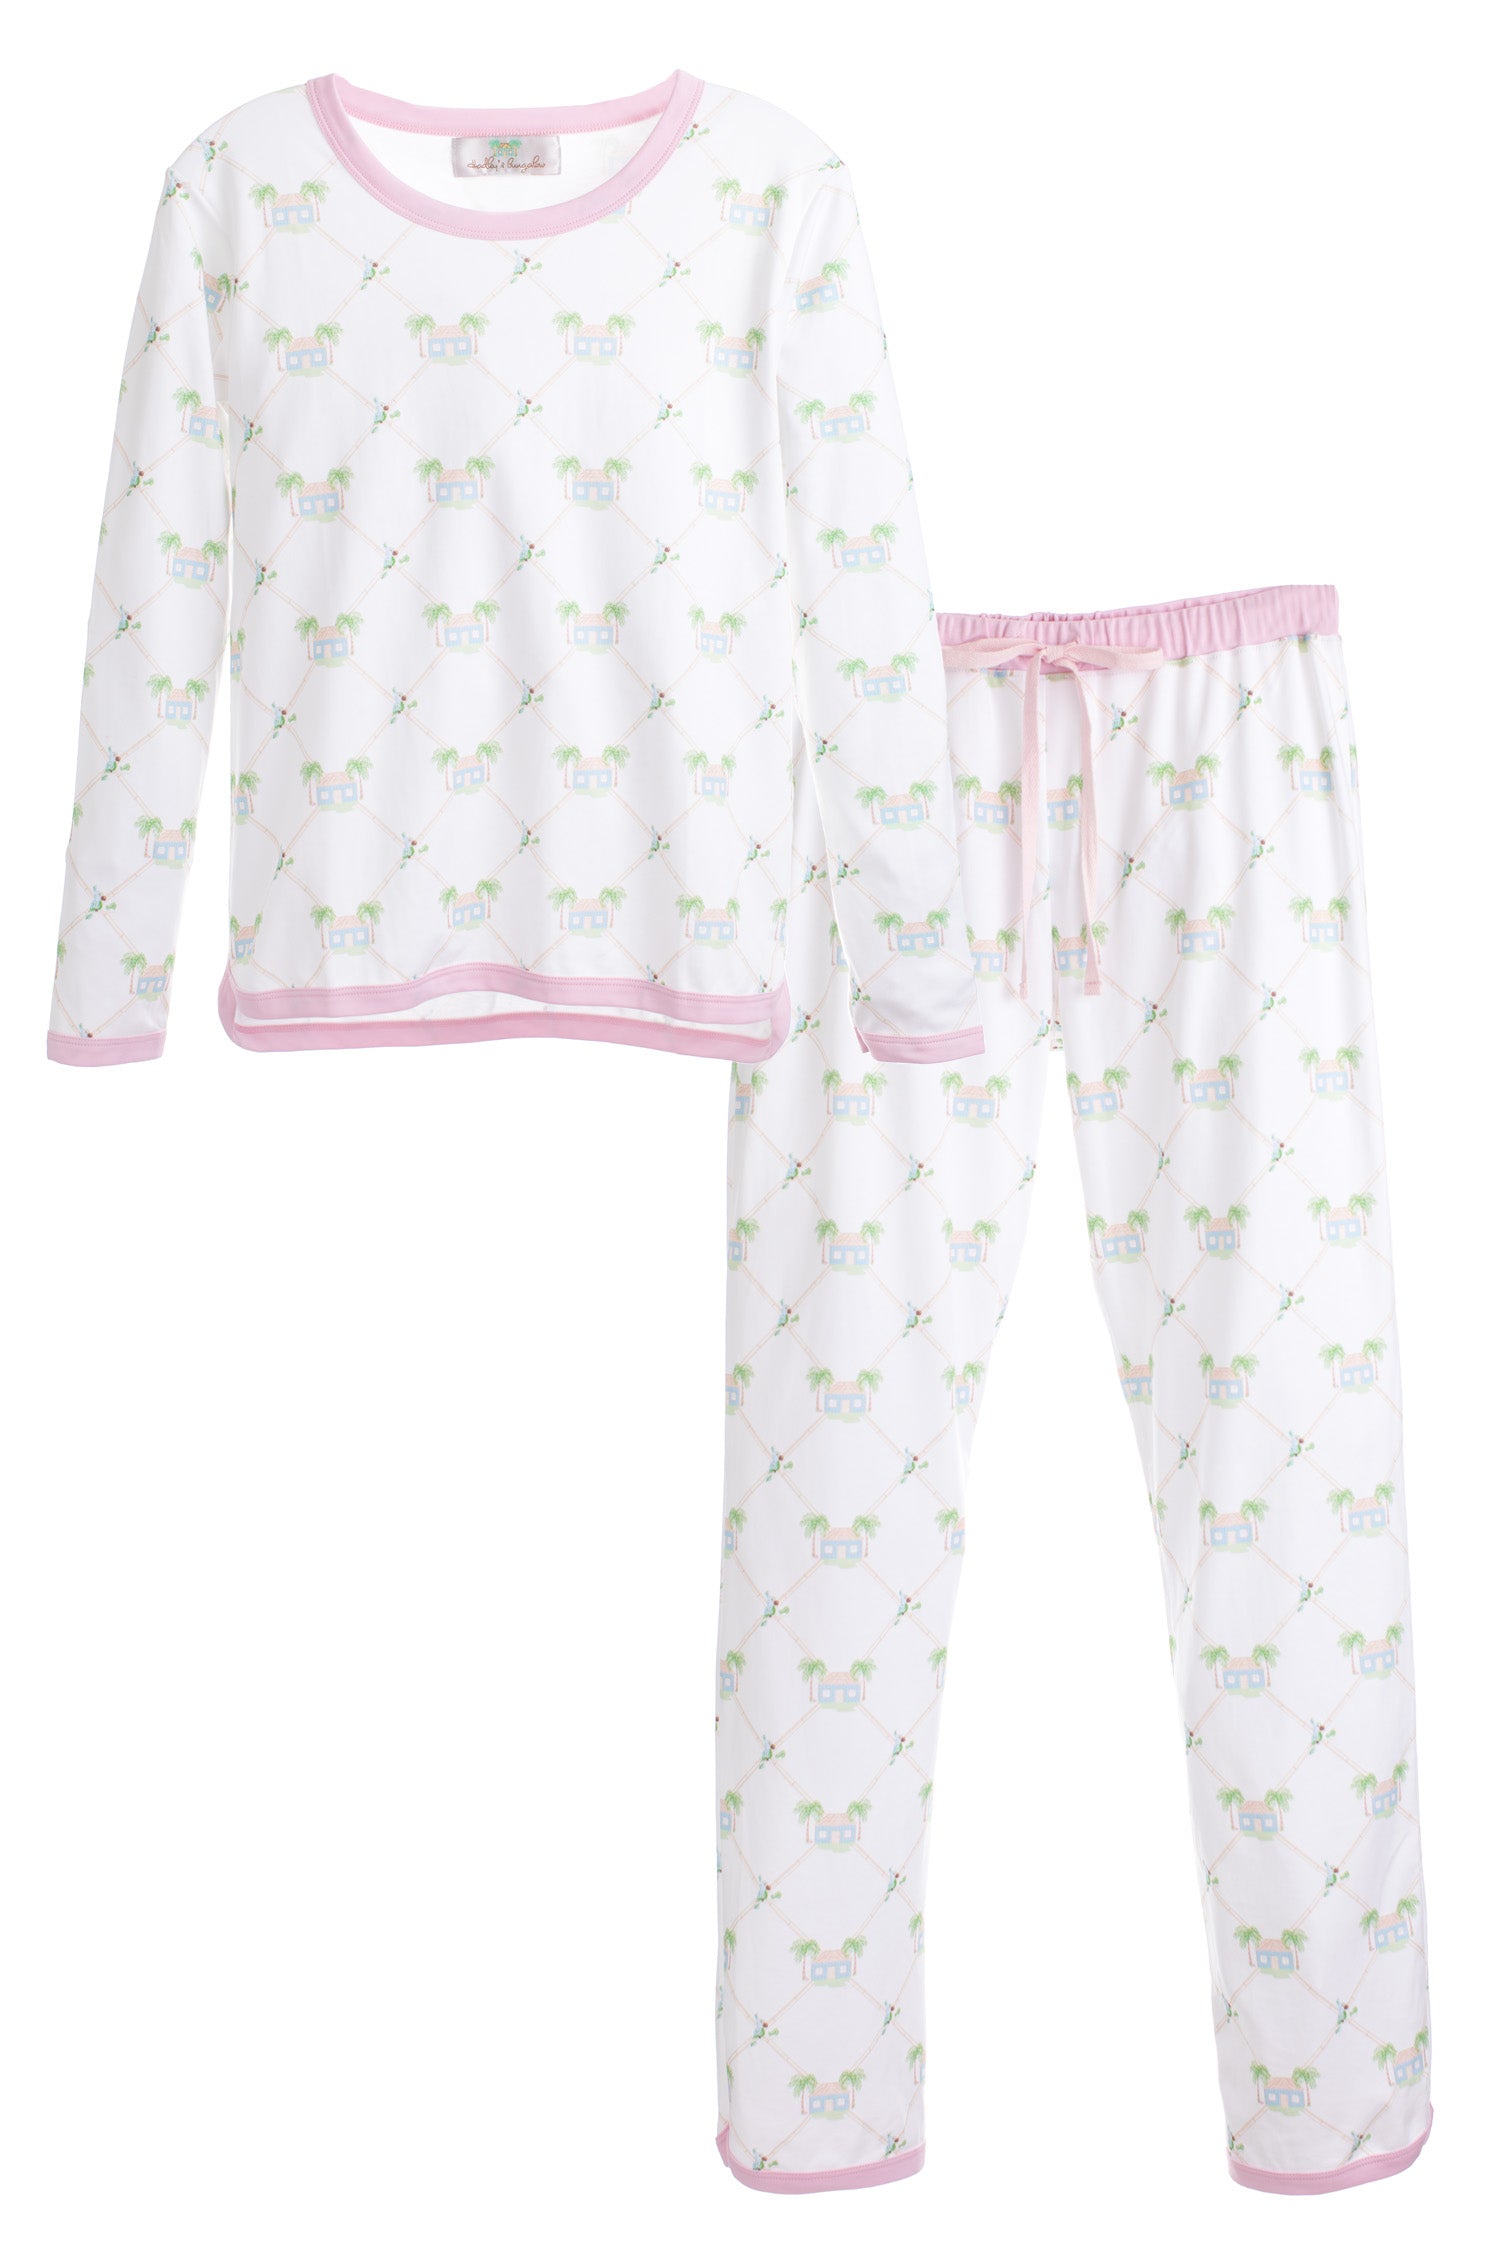 Hadley's Bungalow Signature Print with Soft Pink Trim